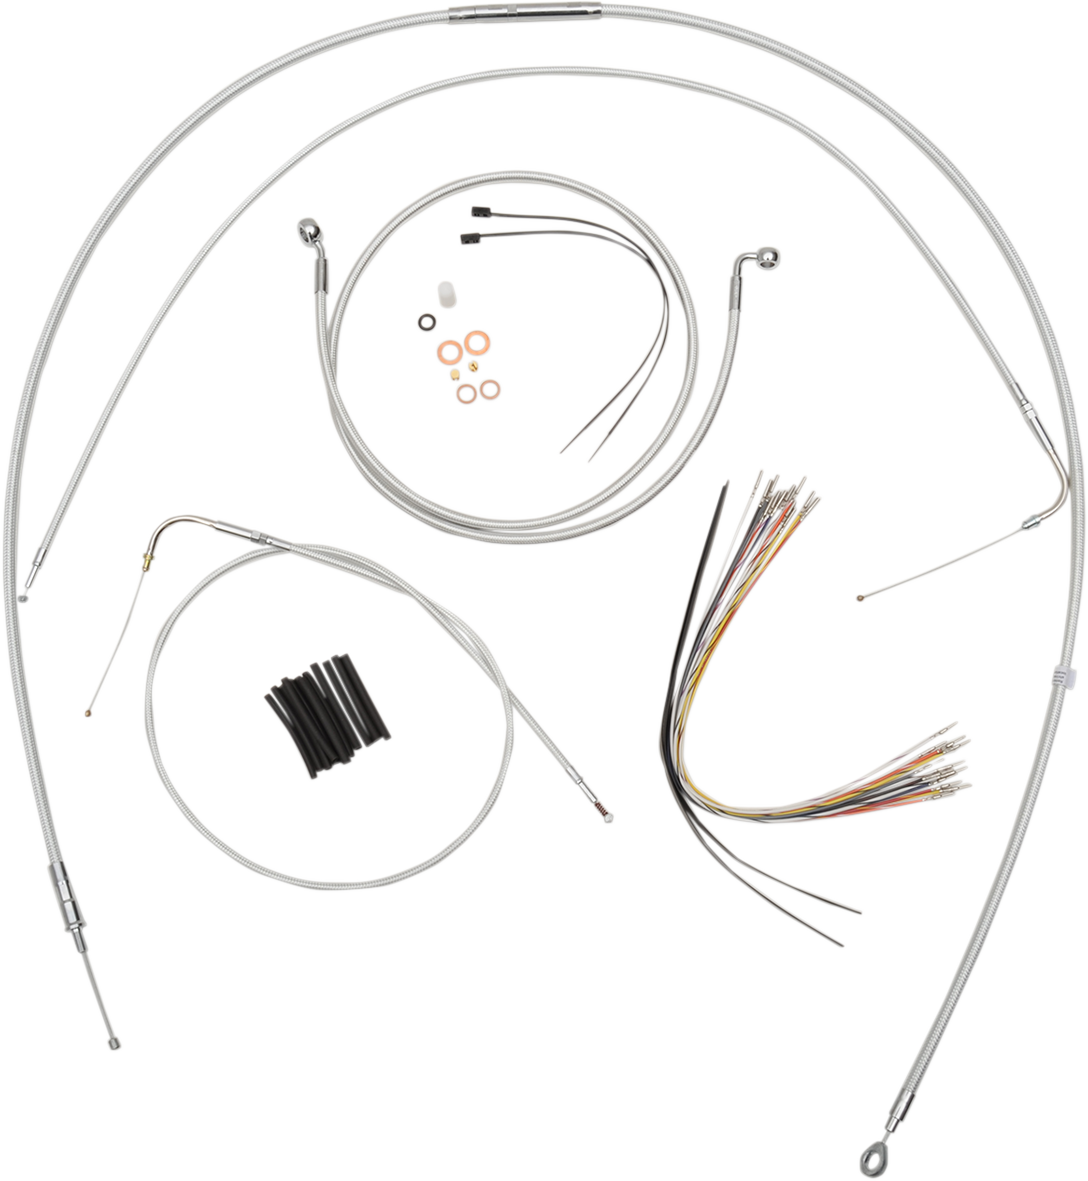 0662-0116 - MAGNUM Control Cable Kit - Sterling Chromite II? 387782